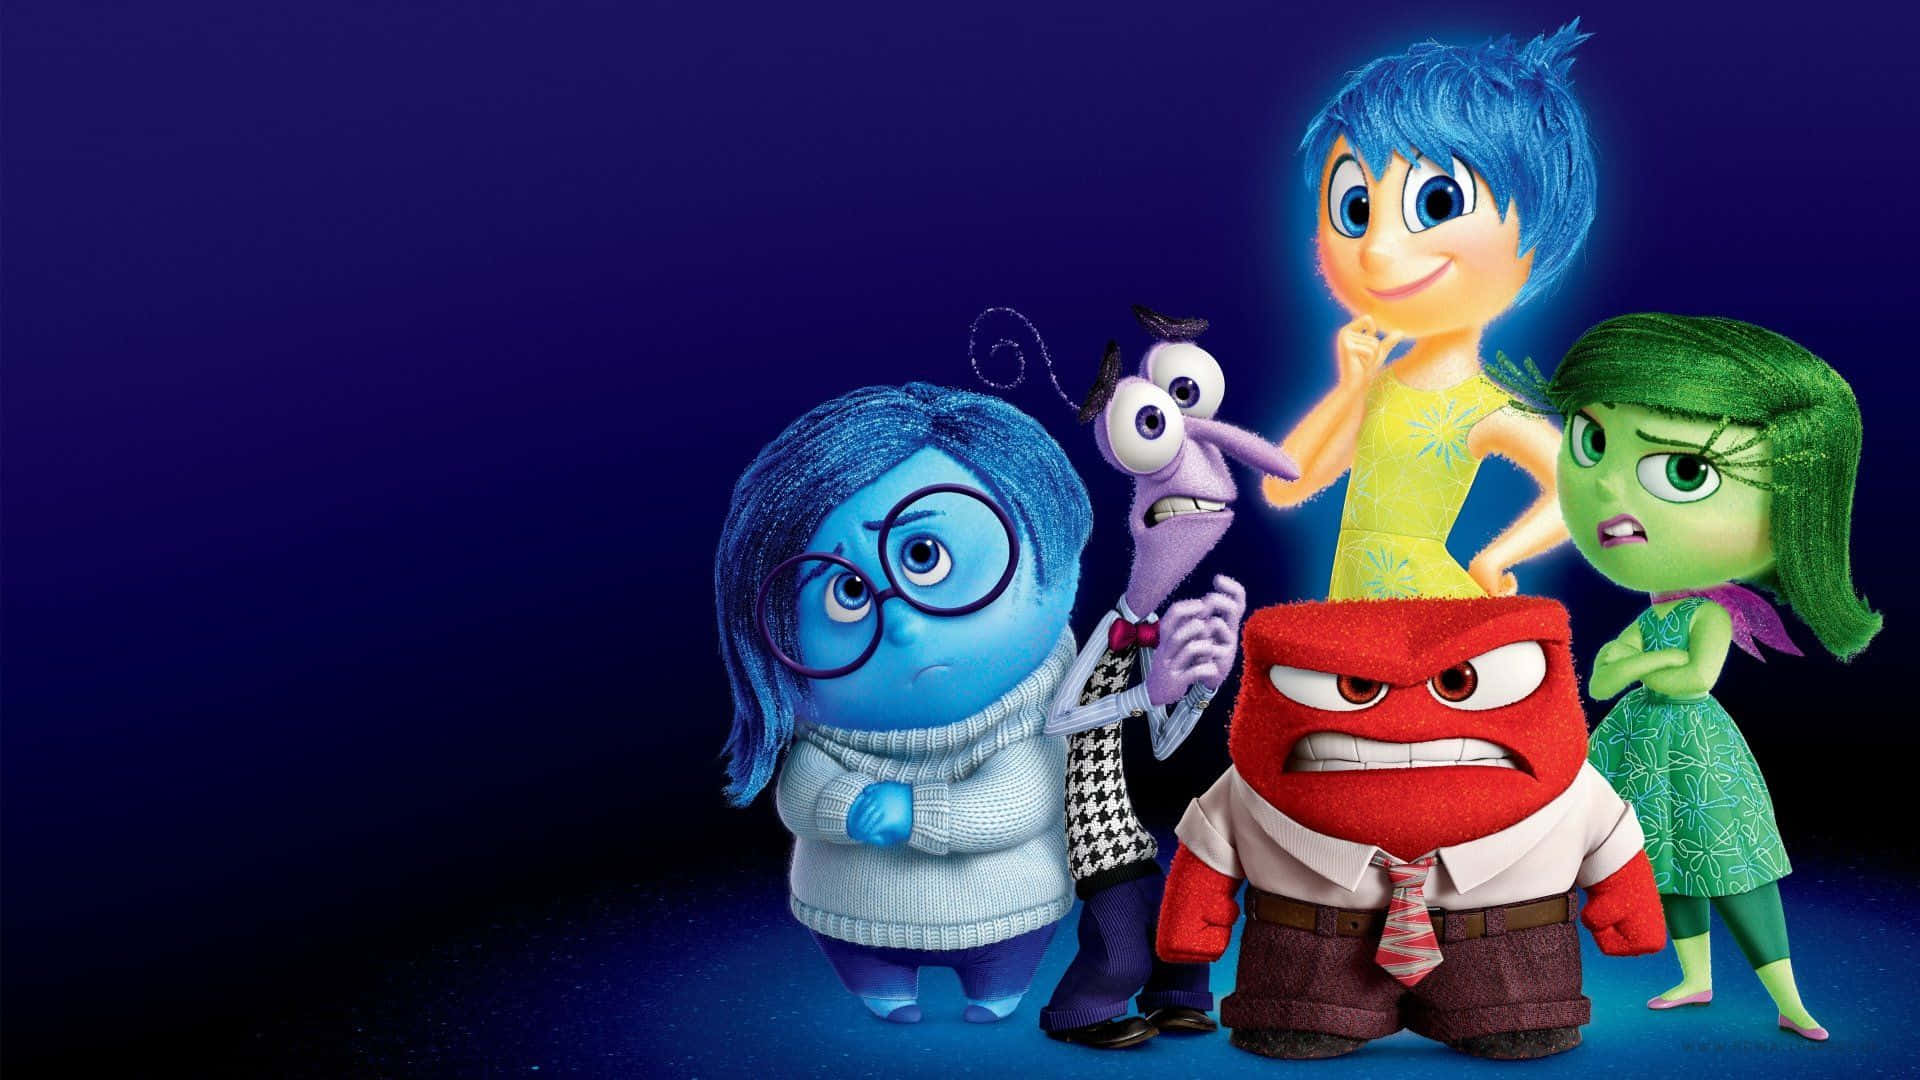 Get to know the five emotions of Riley as seen in Pixar’s Inside Out